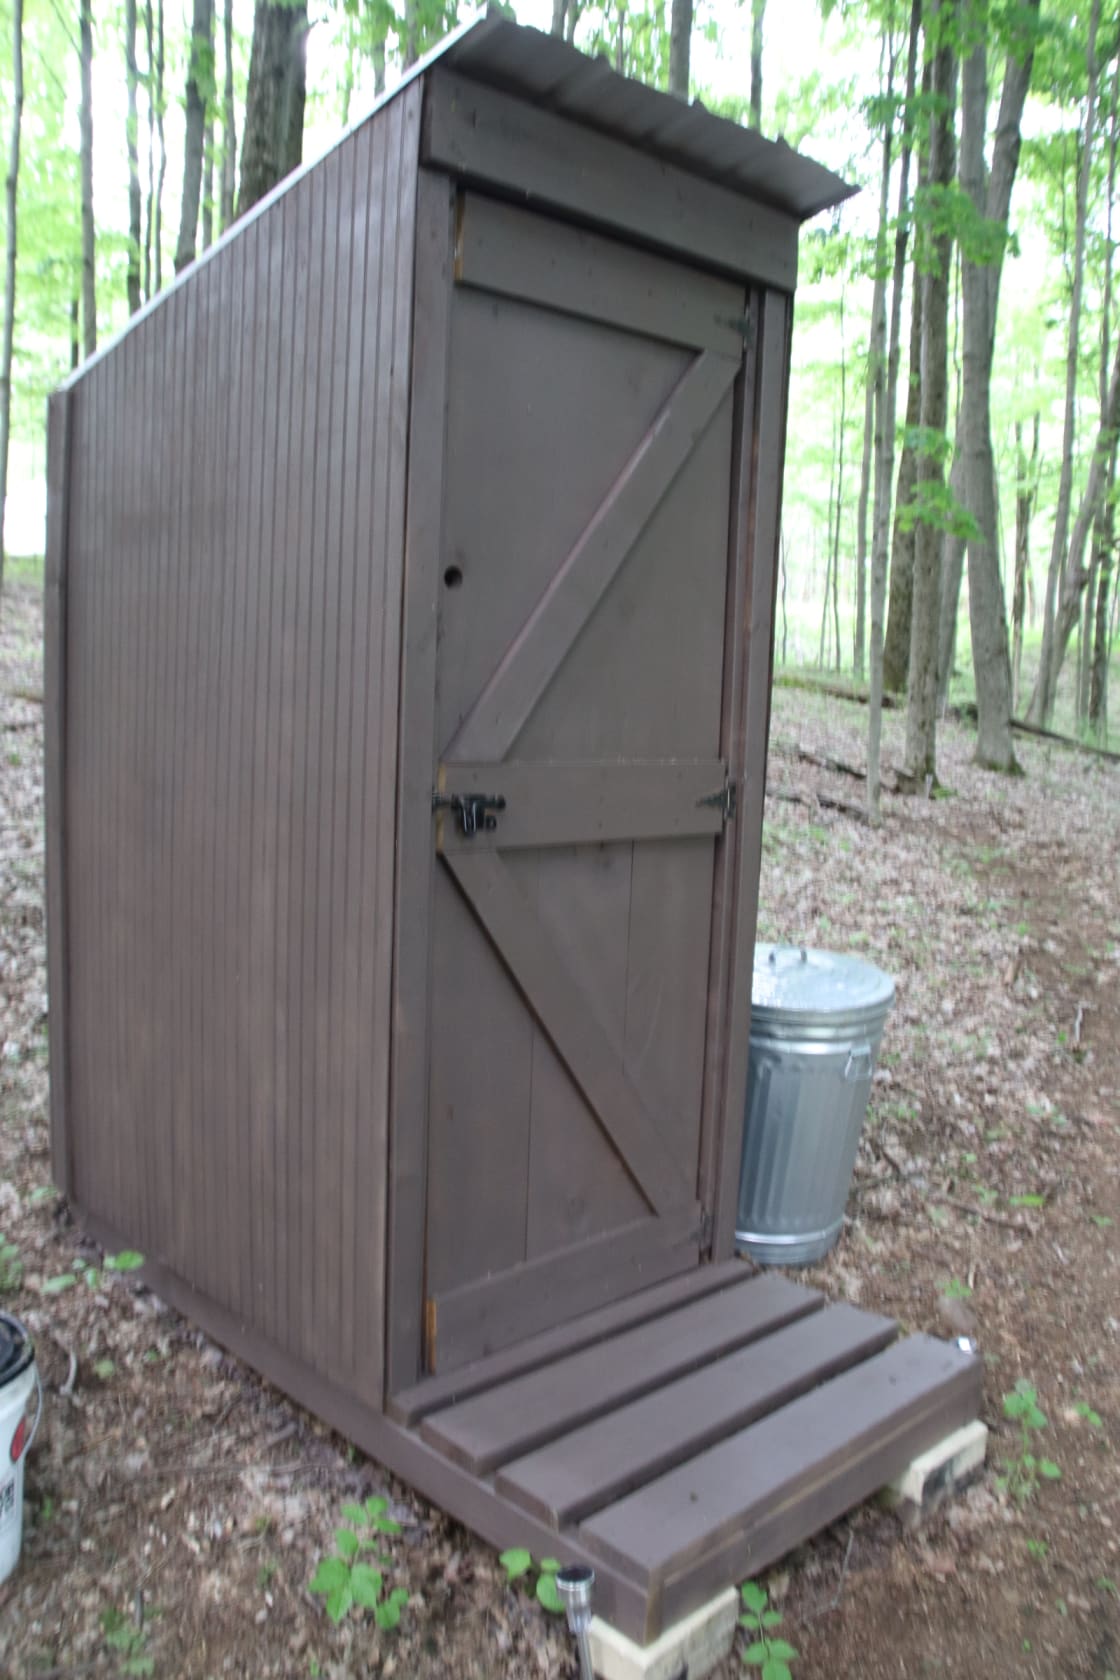 Composting toilet. It's like an outhouse but with no smell.